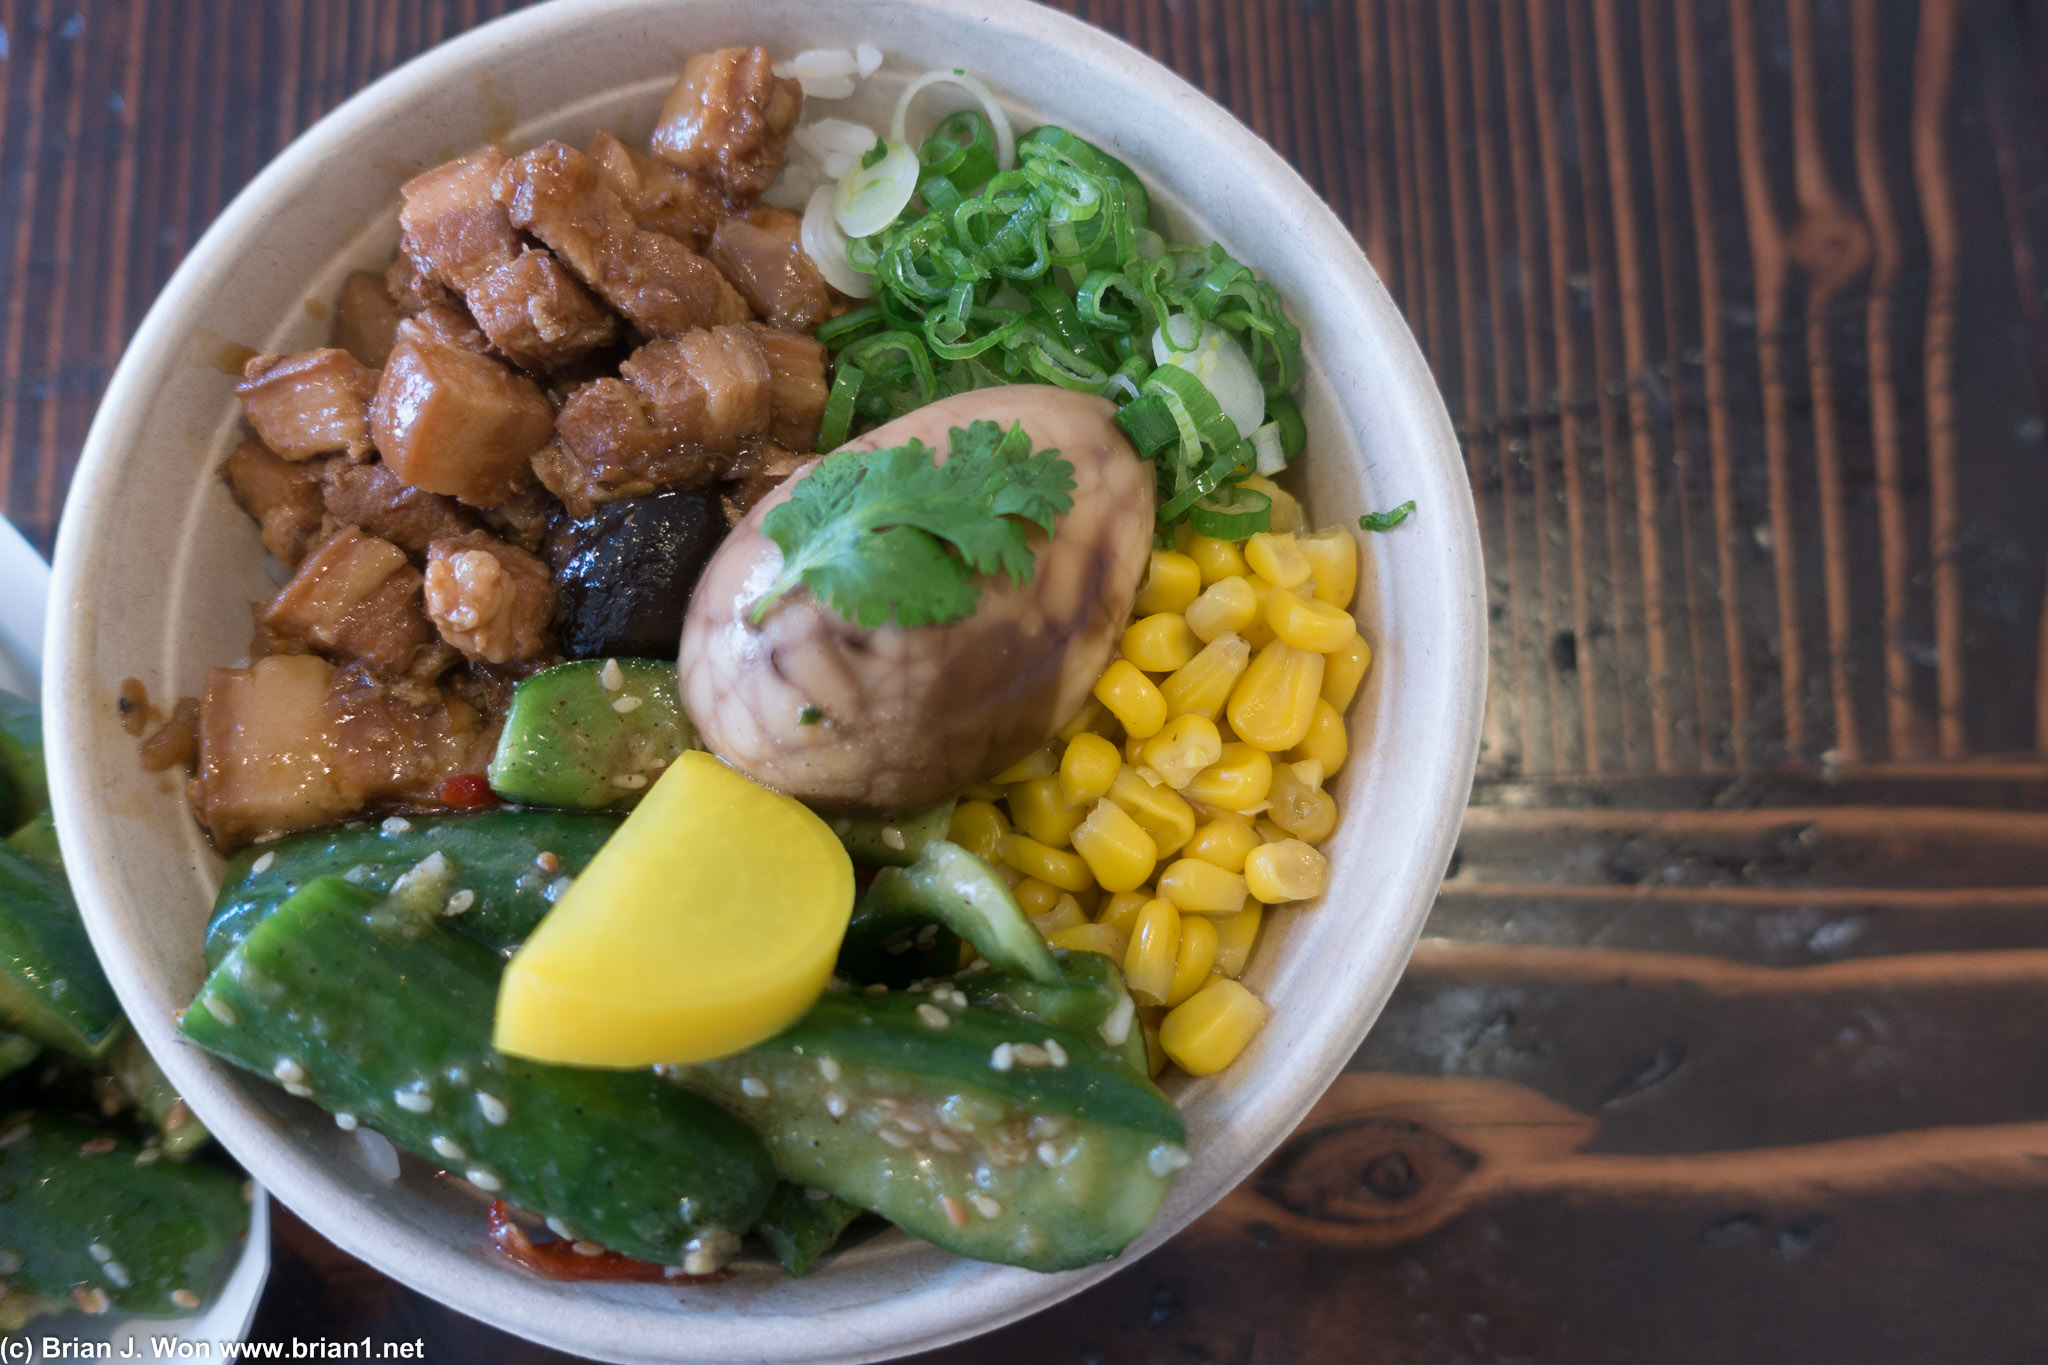 Pork belly bowl. Quite good, but a bit strong on flavors.